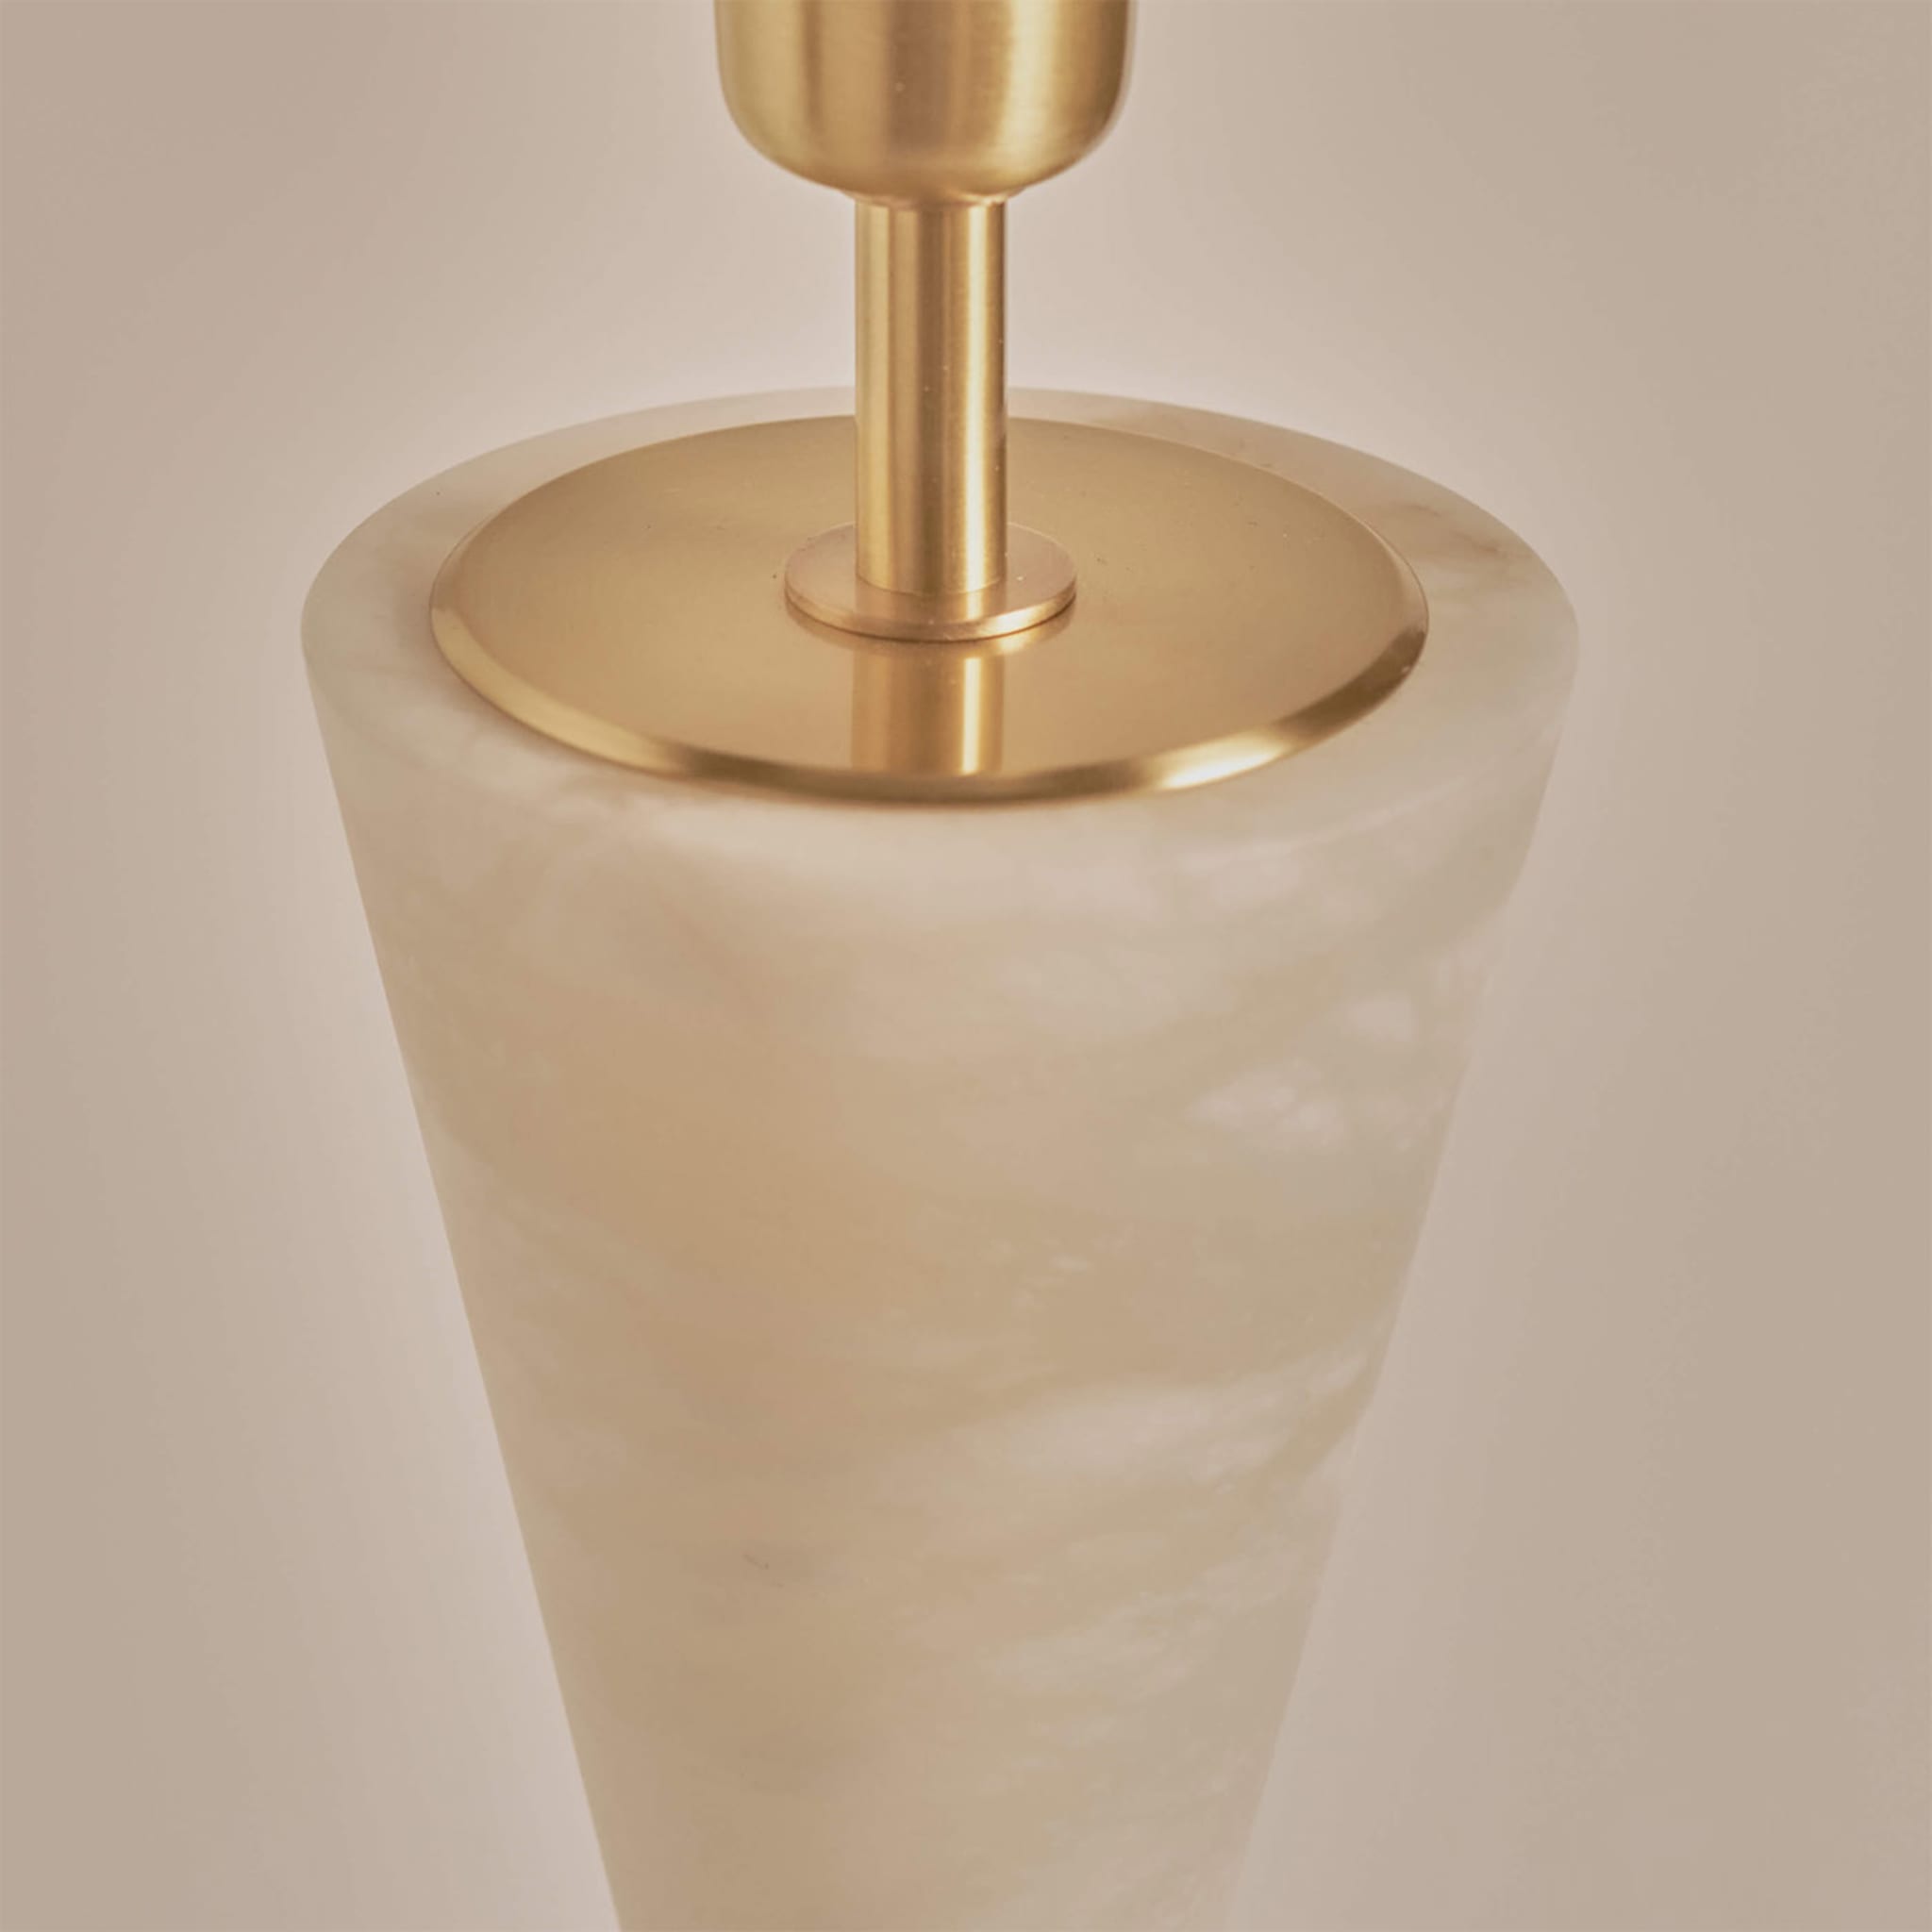 "Silhoette" Table Lamp in Satin Brass - Alternative view 1